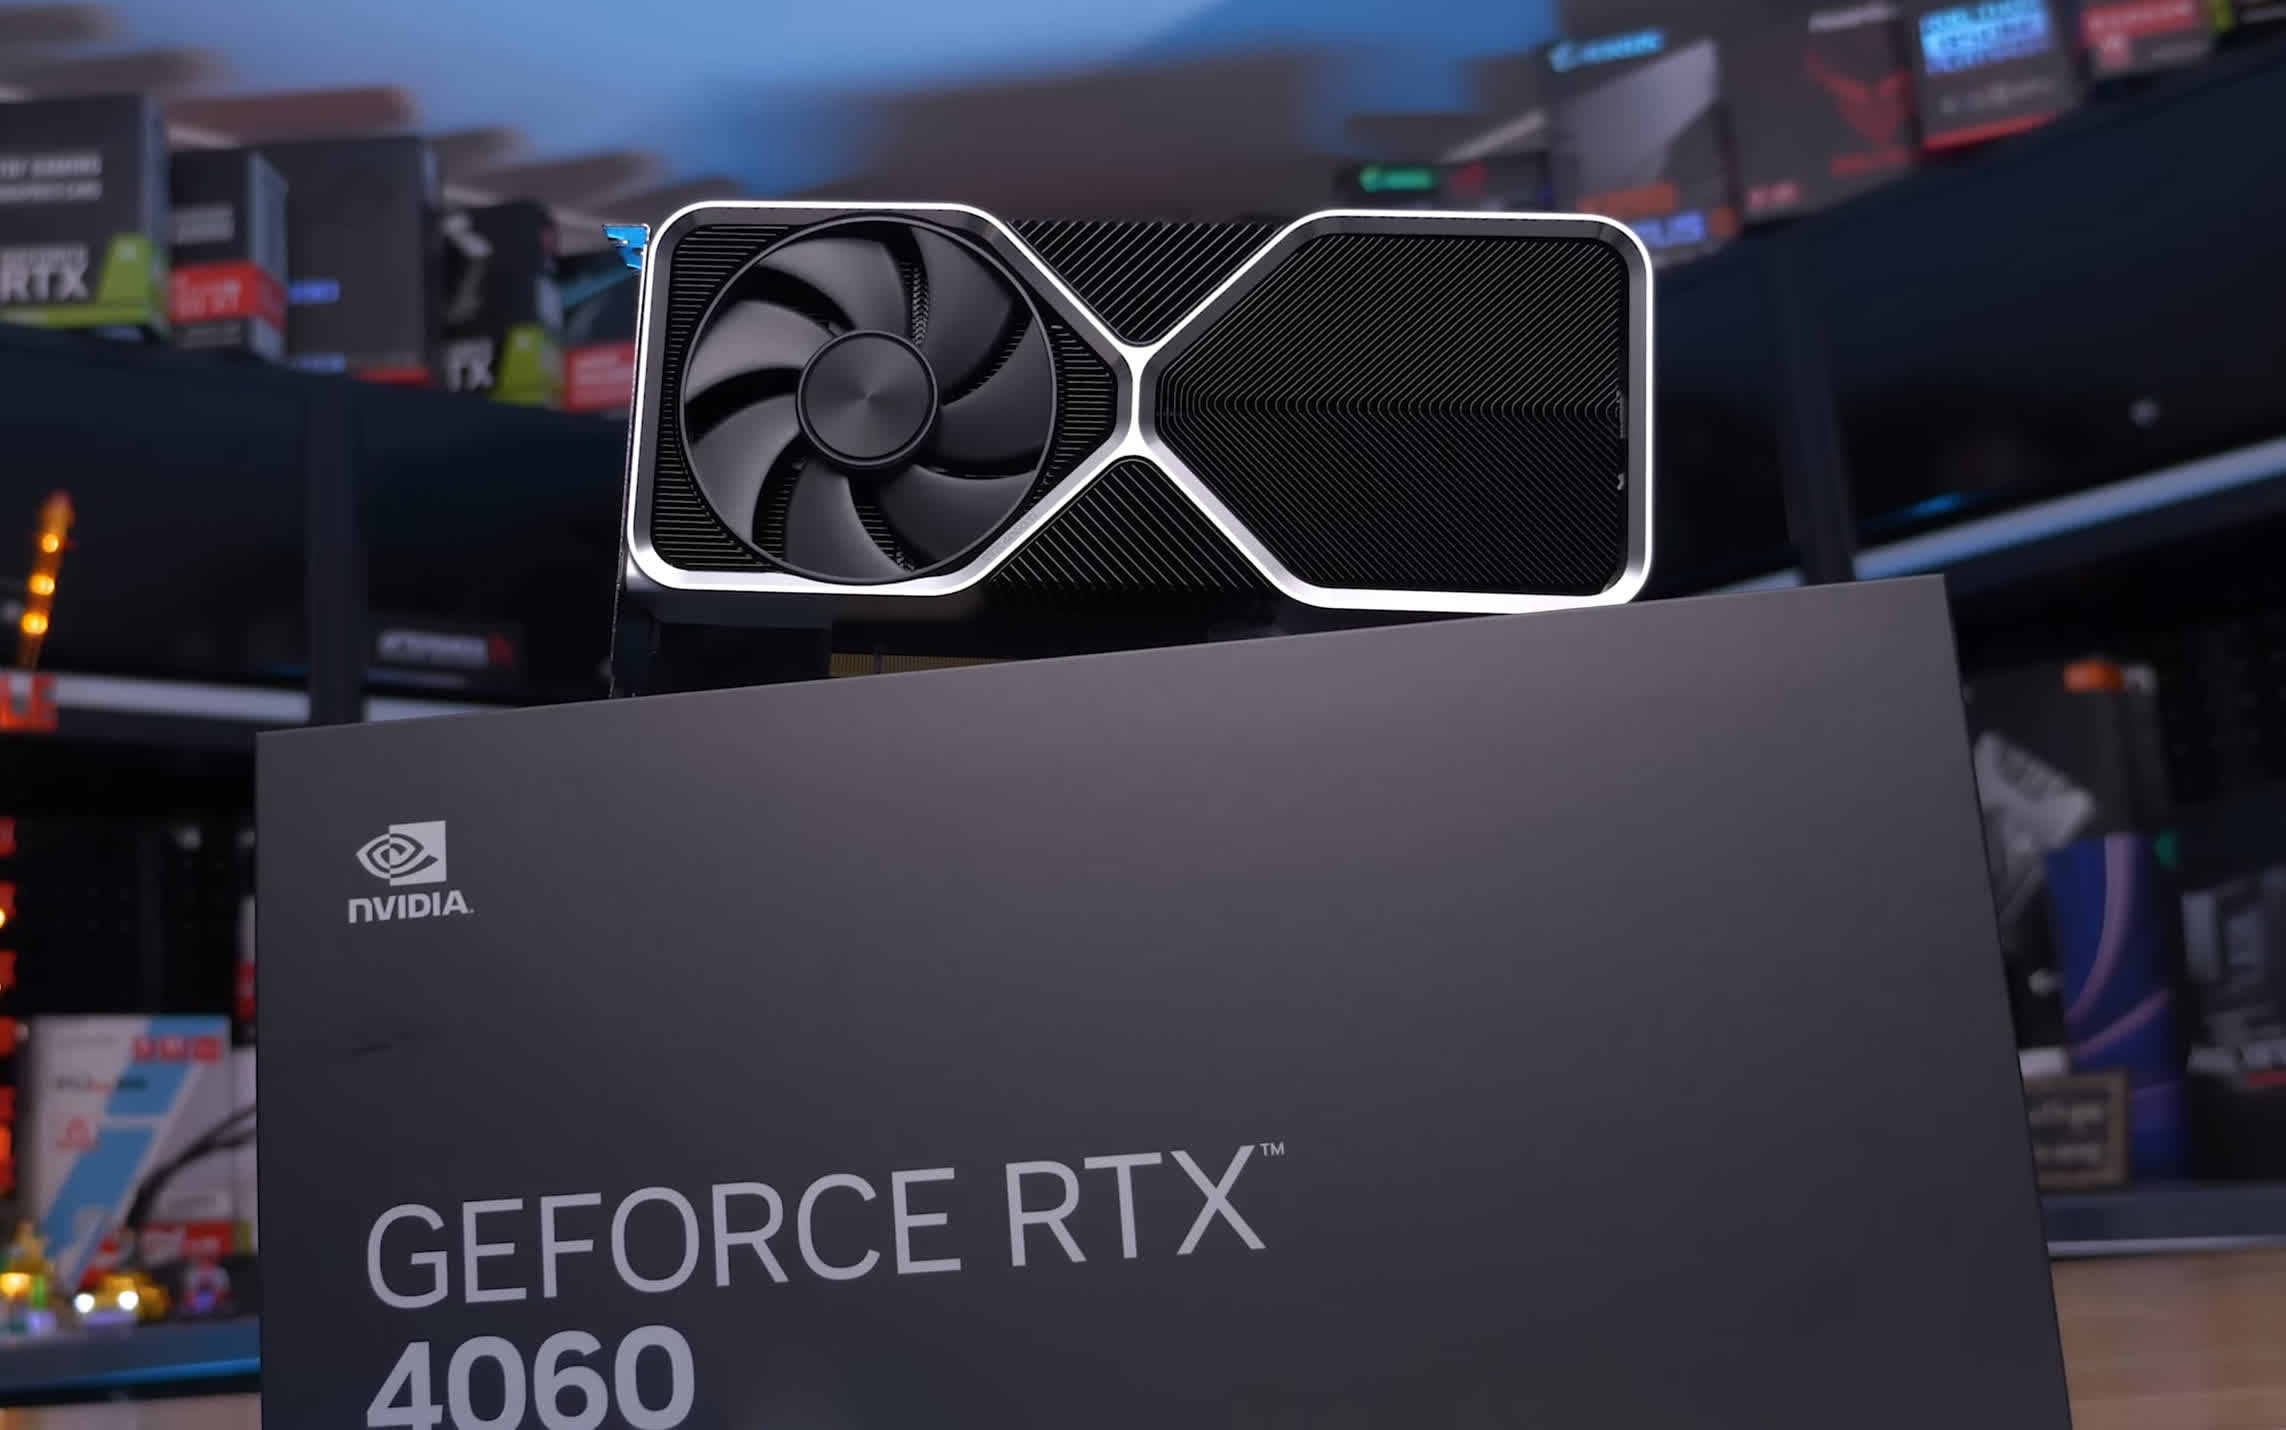 GeForce RTX 4060 video cards from MSI show up on Newegg from $299